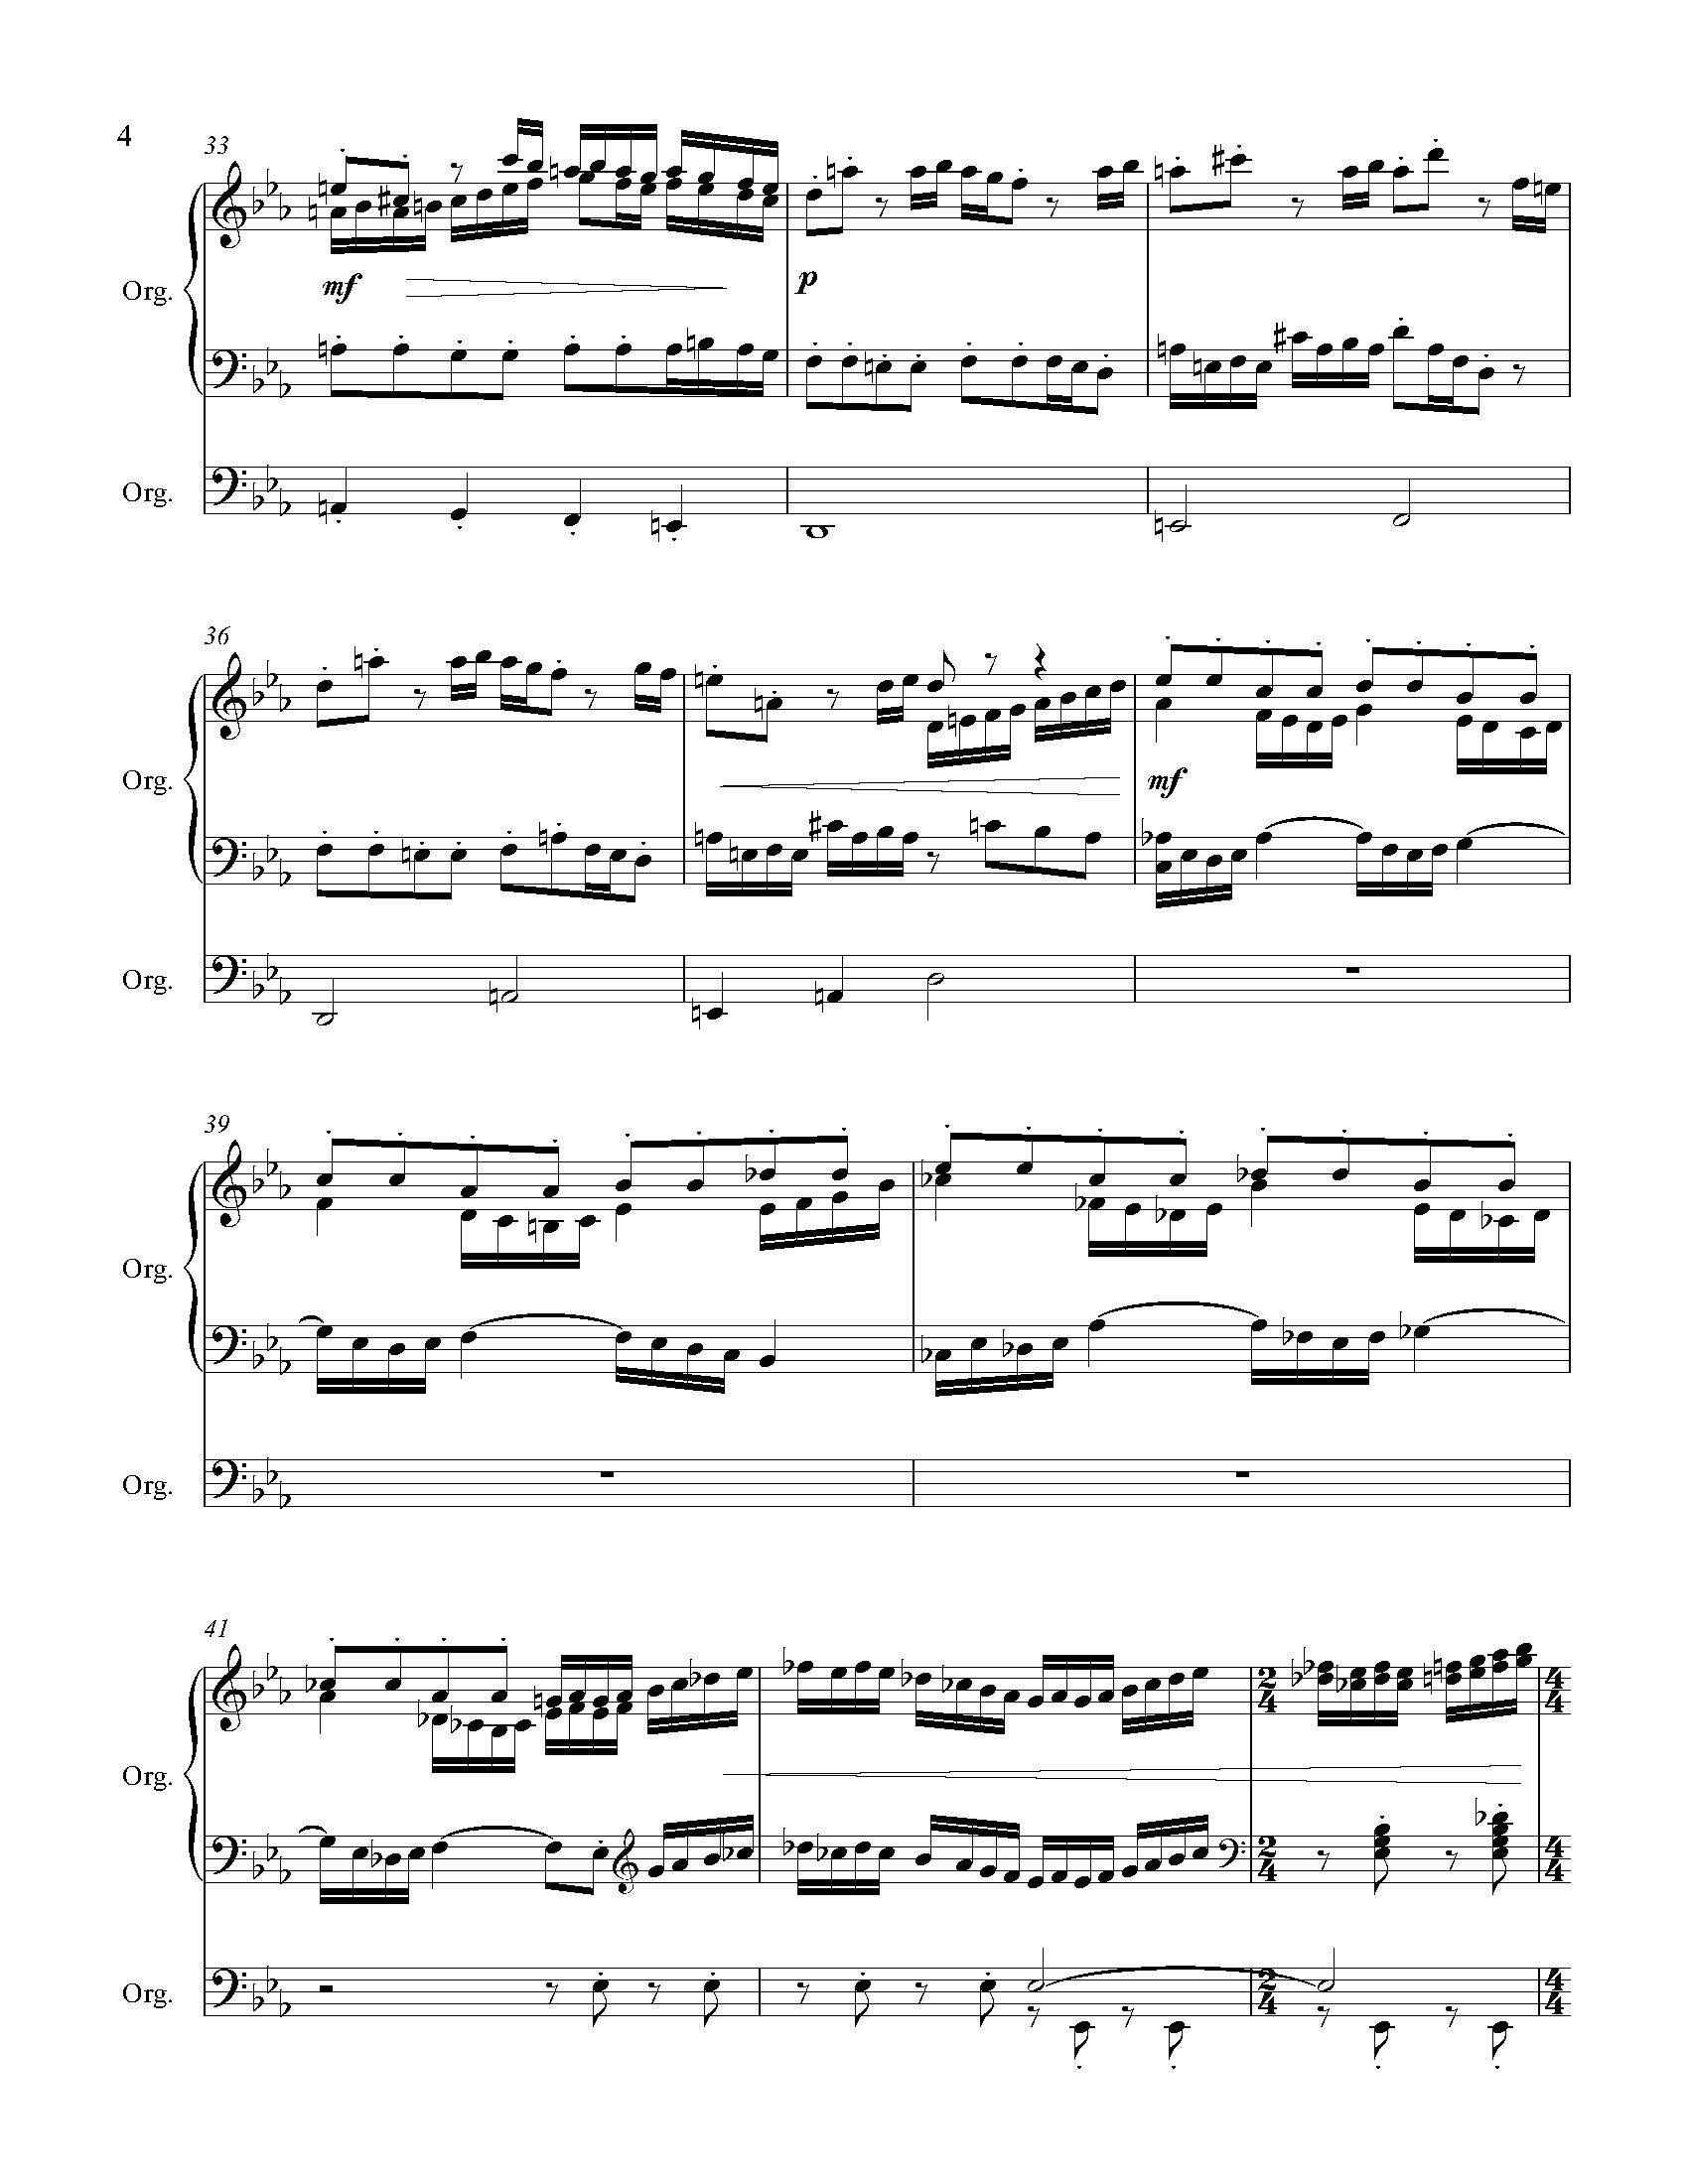 Baroque Fantasy on Go Down Moses - Complete Score_Page_10.jpg